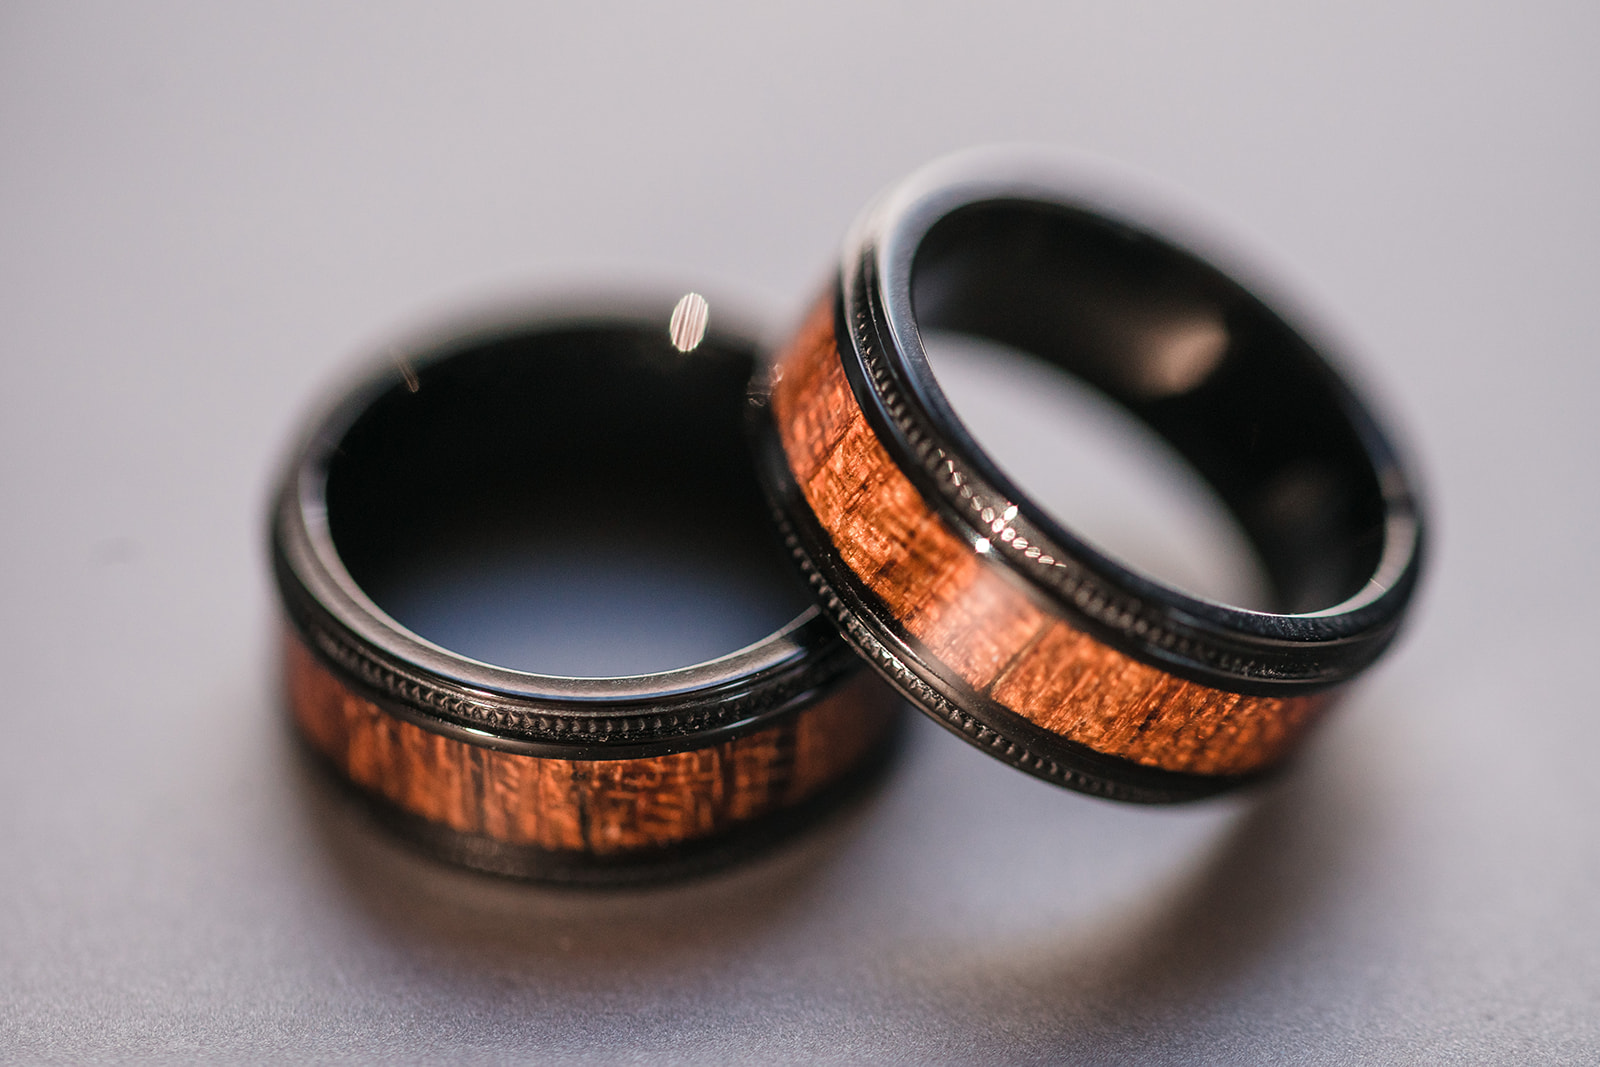 Two groom wedding bands with a unique wood grain design in the center of each band, symbolizing strength and natural beauty.